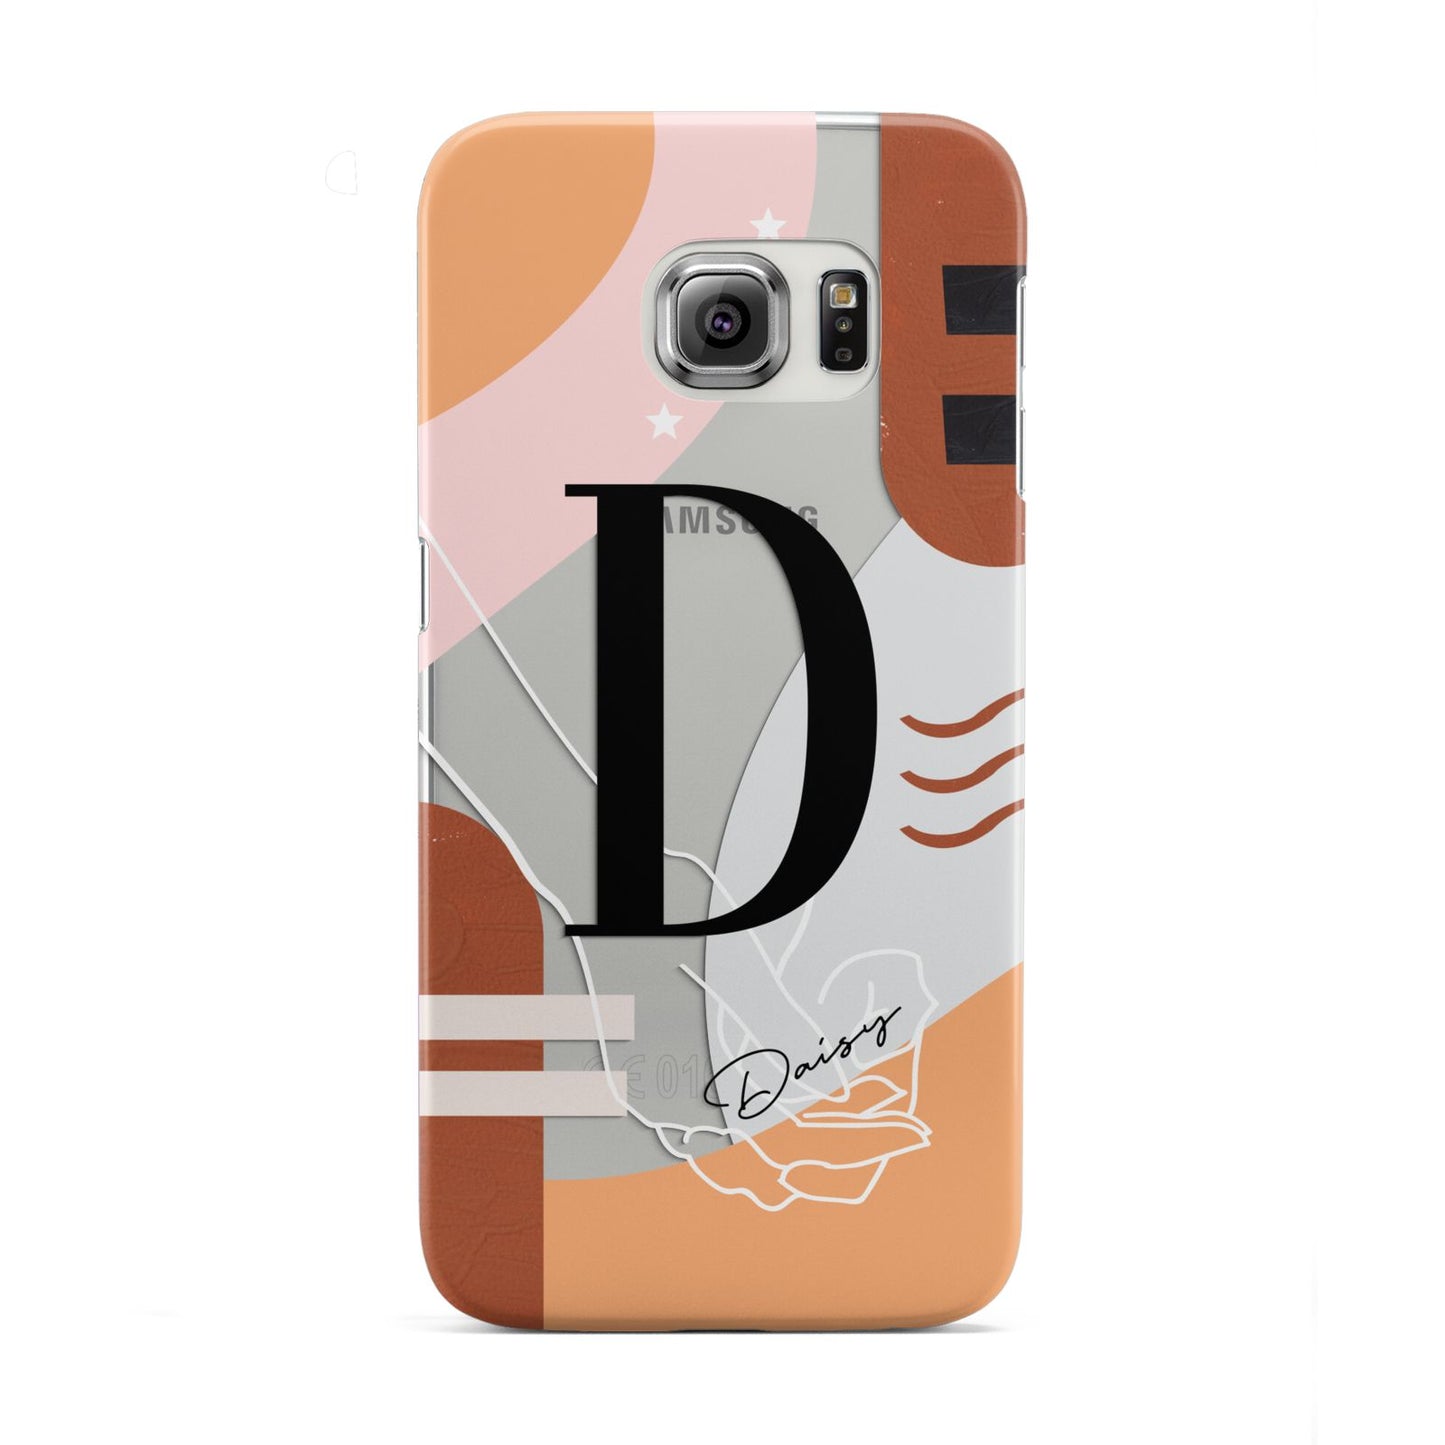 Personalised Abstract Samsung Galaxy S6 Edge Case